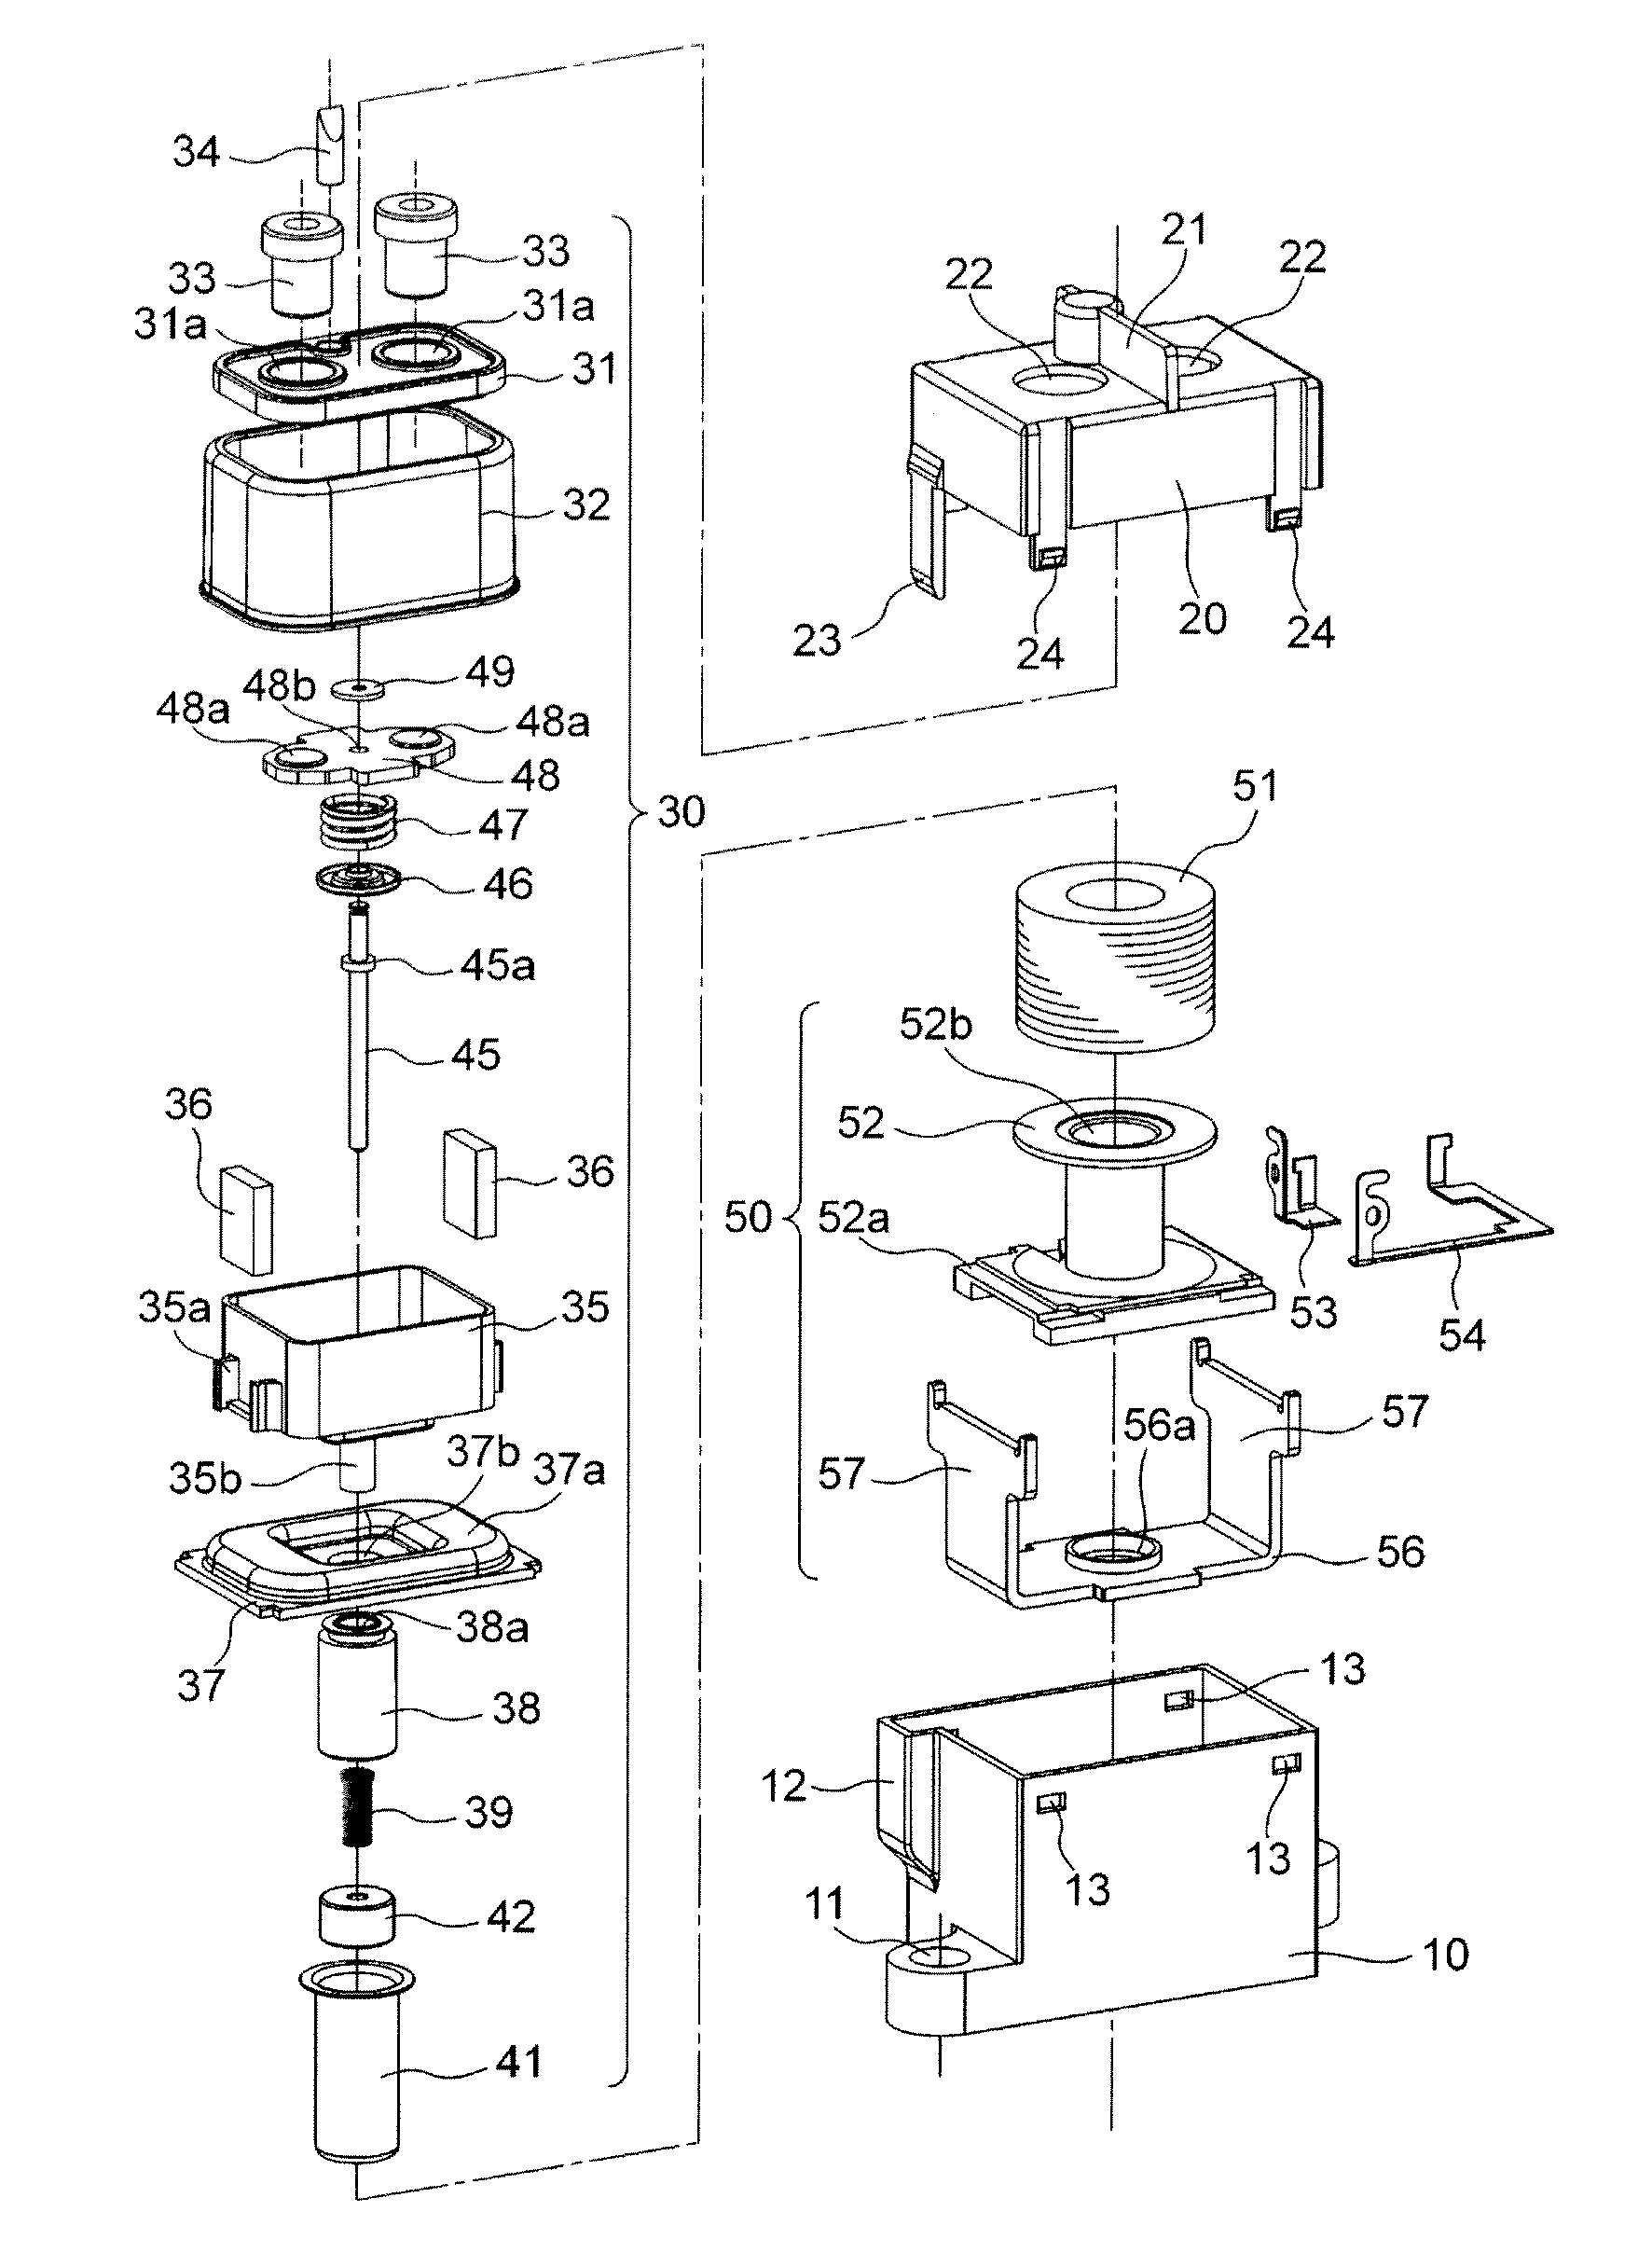 Contact switching device